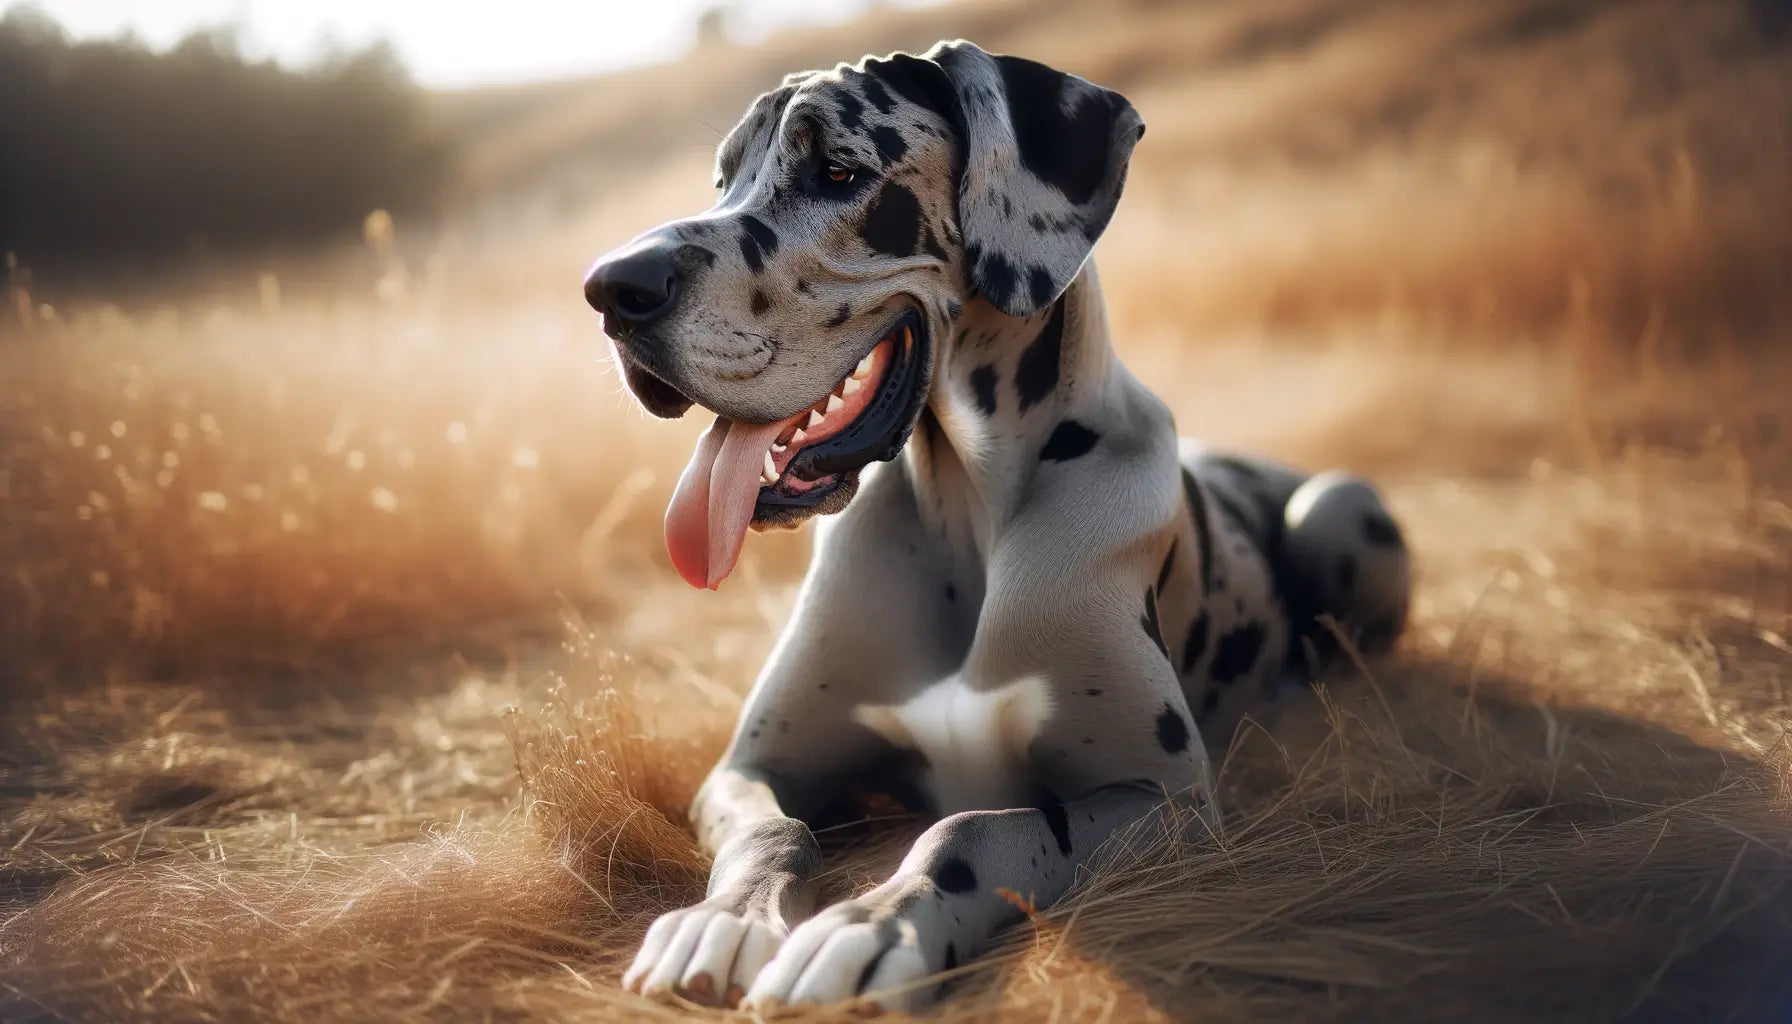 A Merle Great Dane lying on dry grass, content and at ease with its tongue out, indicating a playful or restful moment after enjoying outdoor fun.